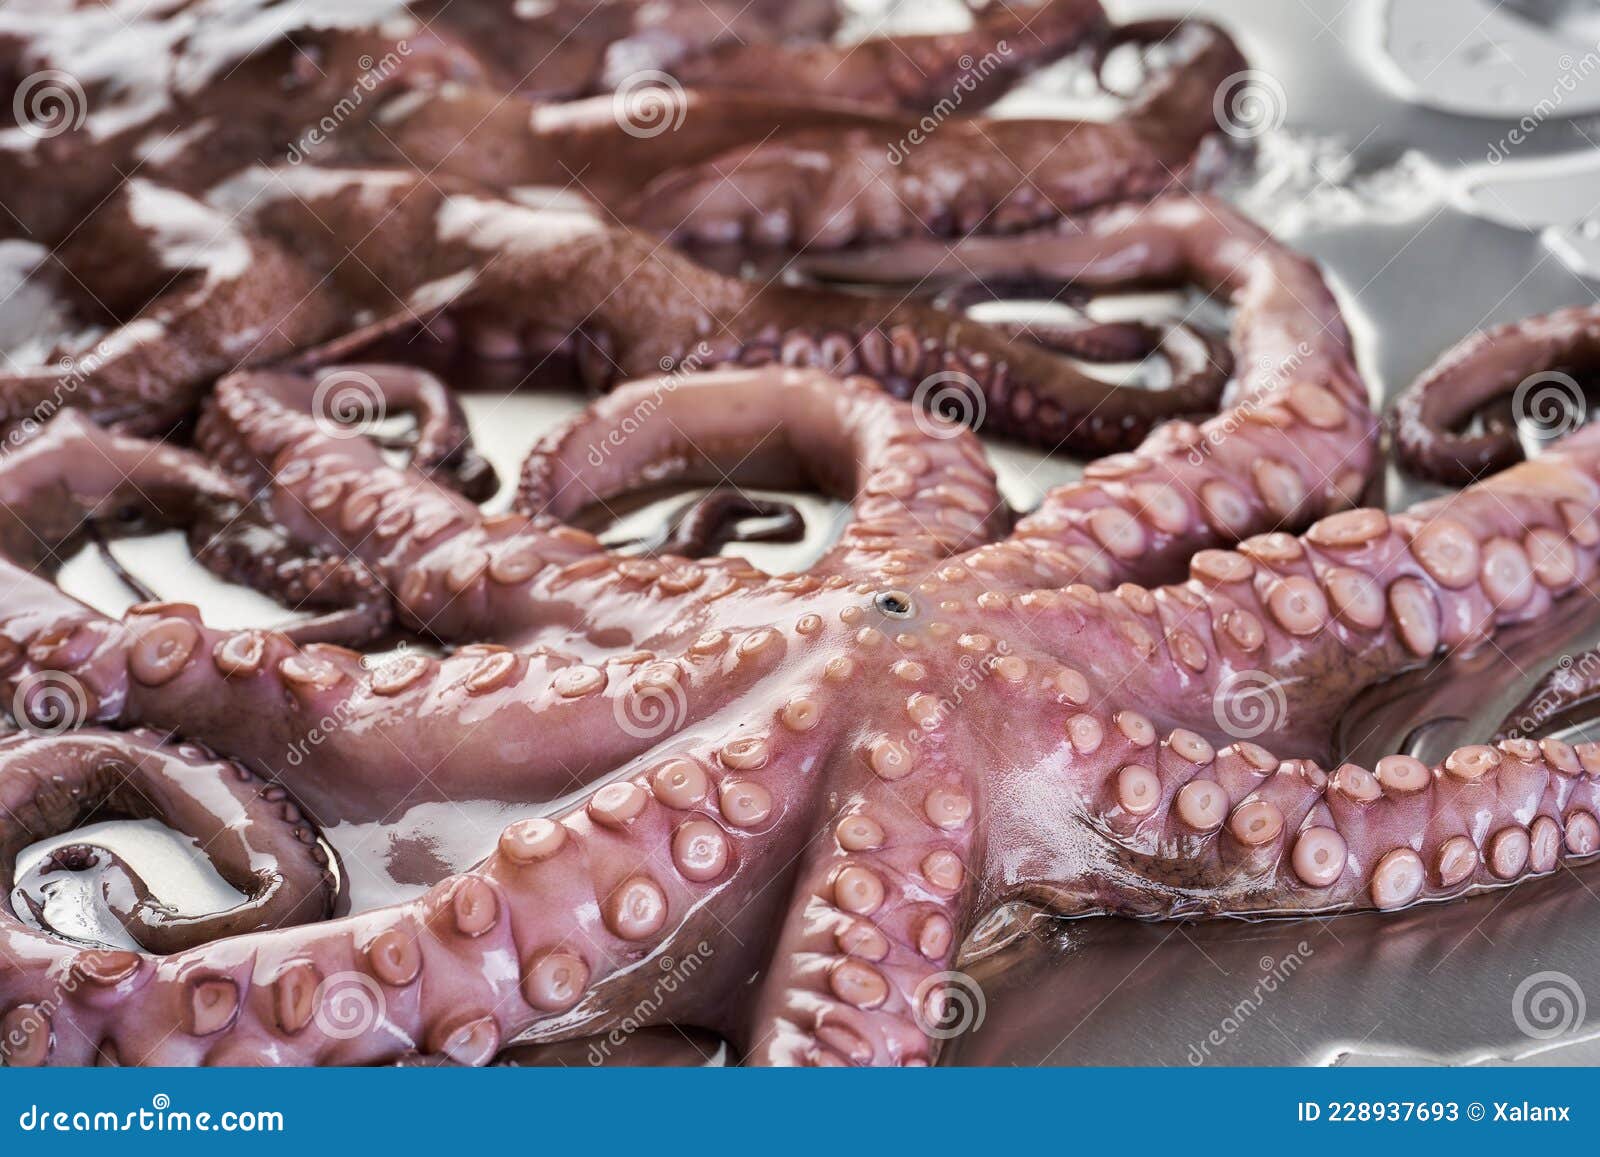 The chef cooks small octopus on a metal frying pan at the